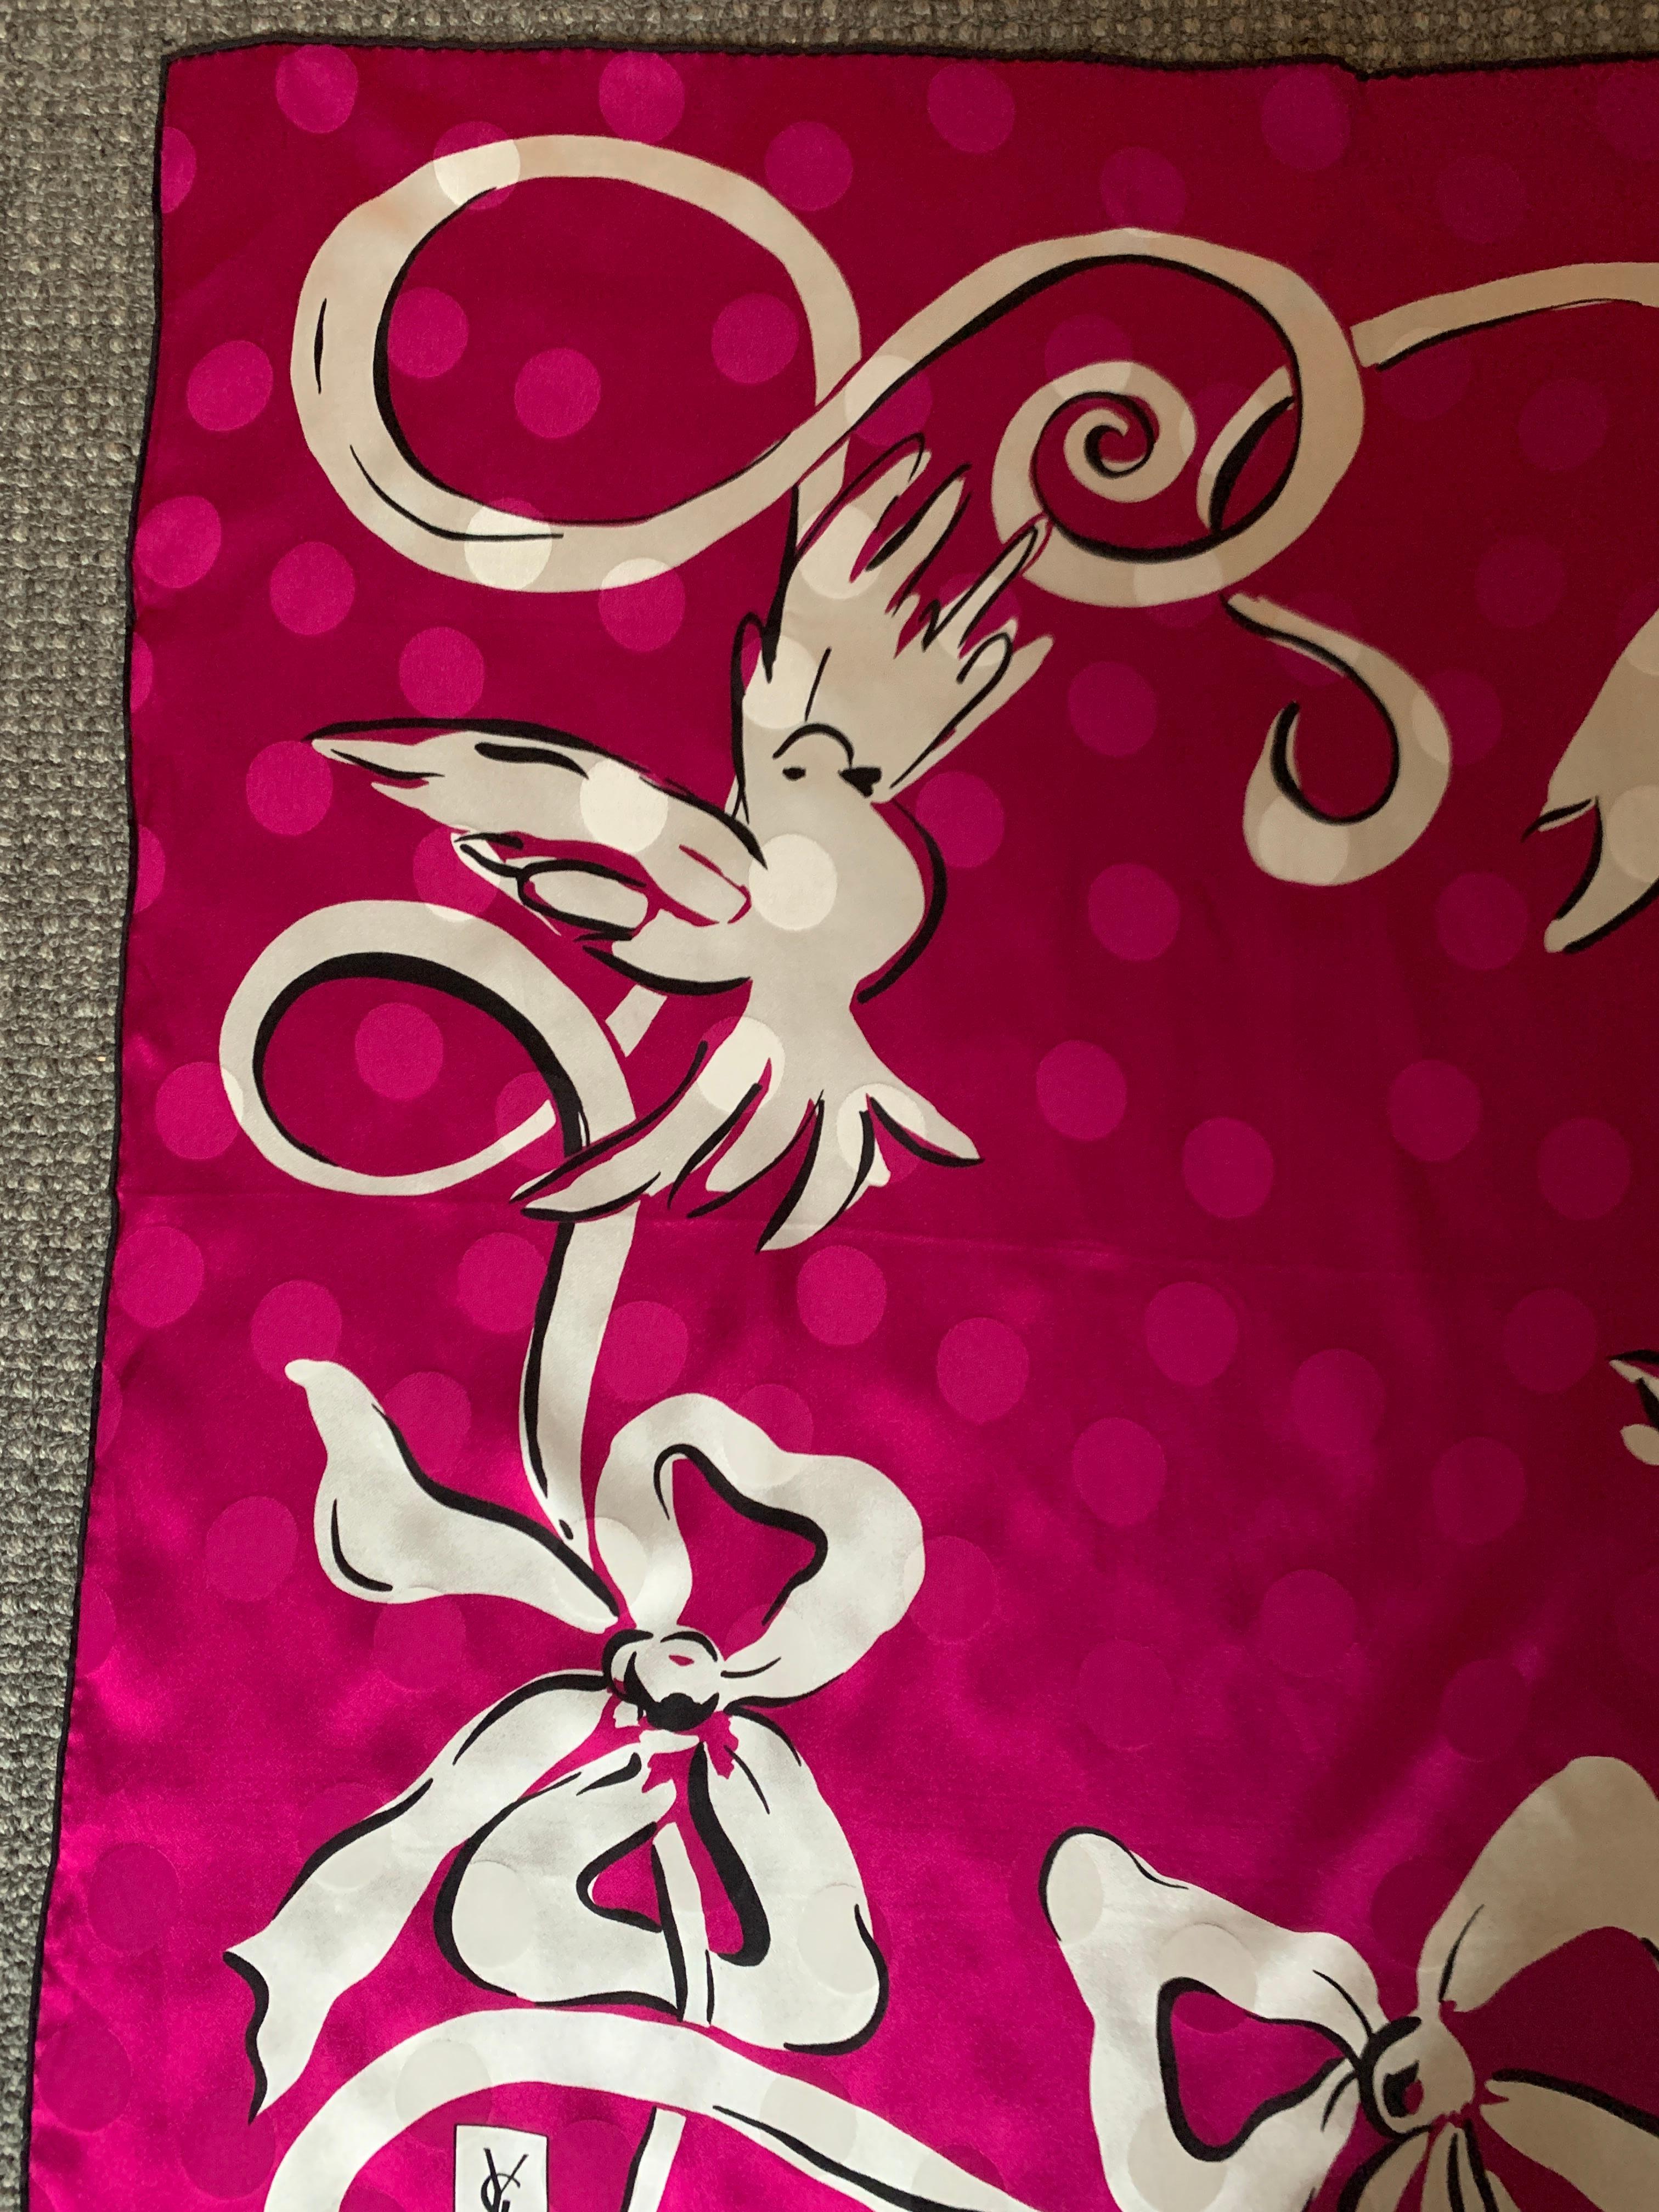 Yves Saint Laurent Vintage Silk Scarf in Fuchsia Pink Dove and Ribbon Print 2